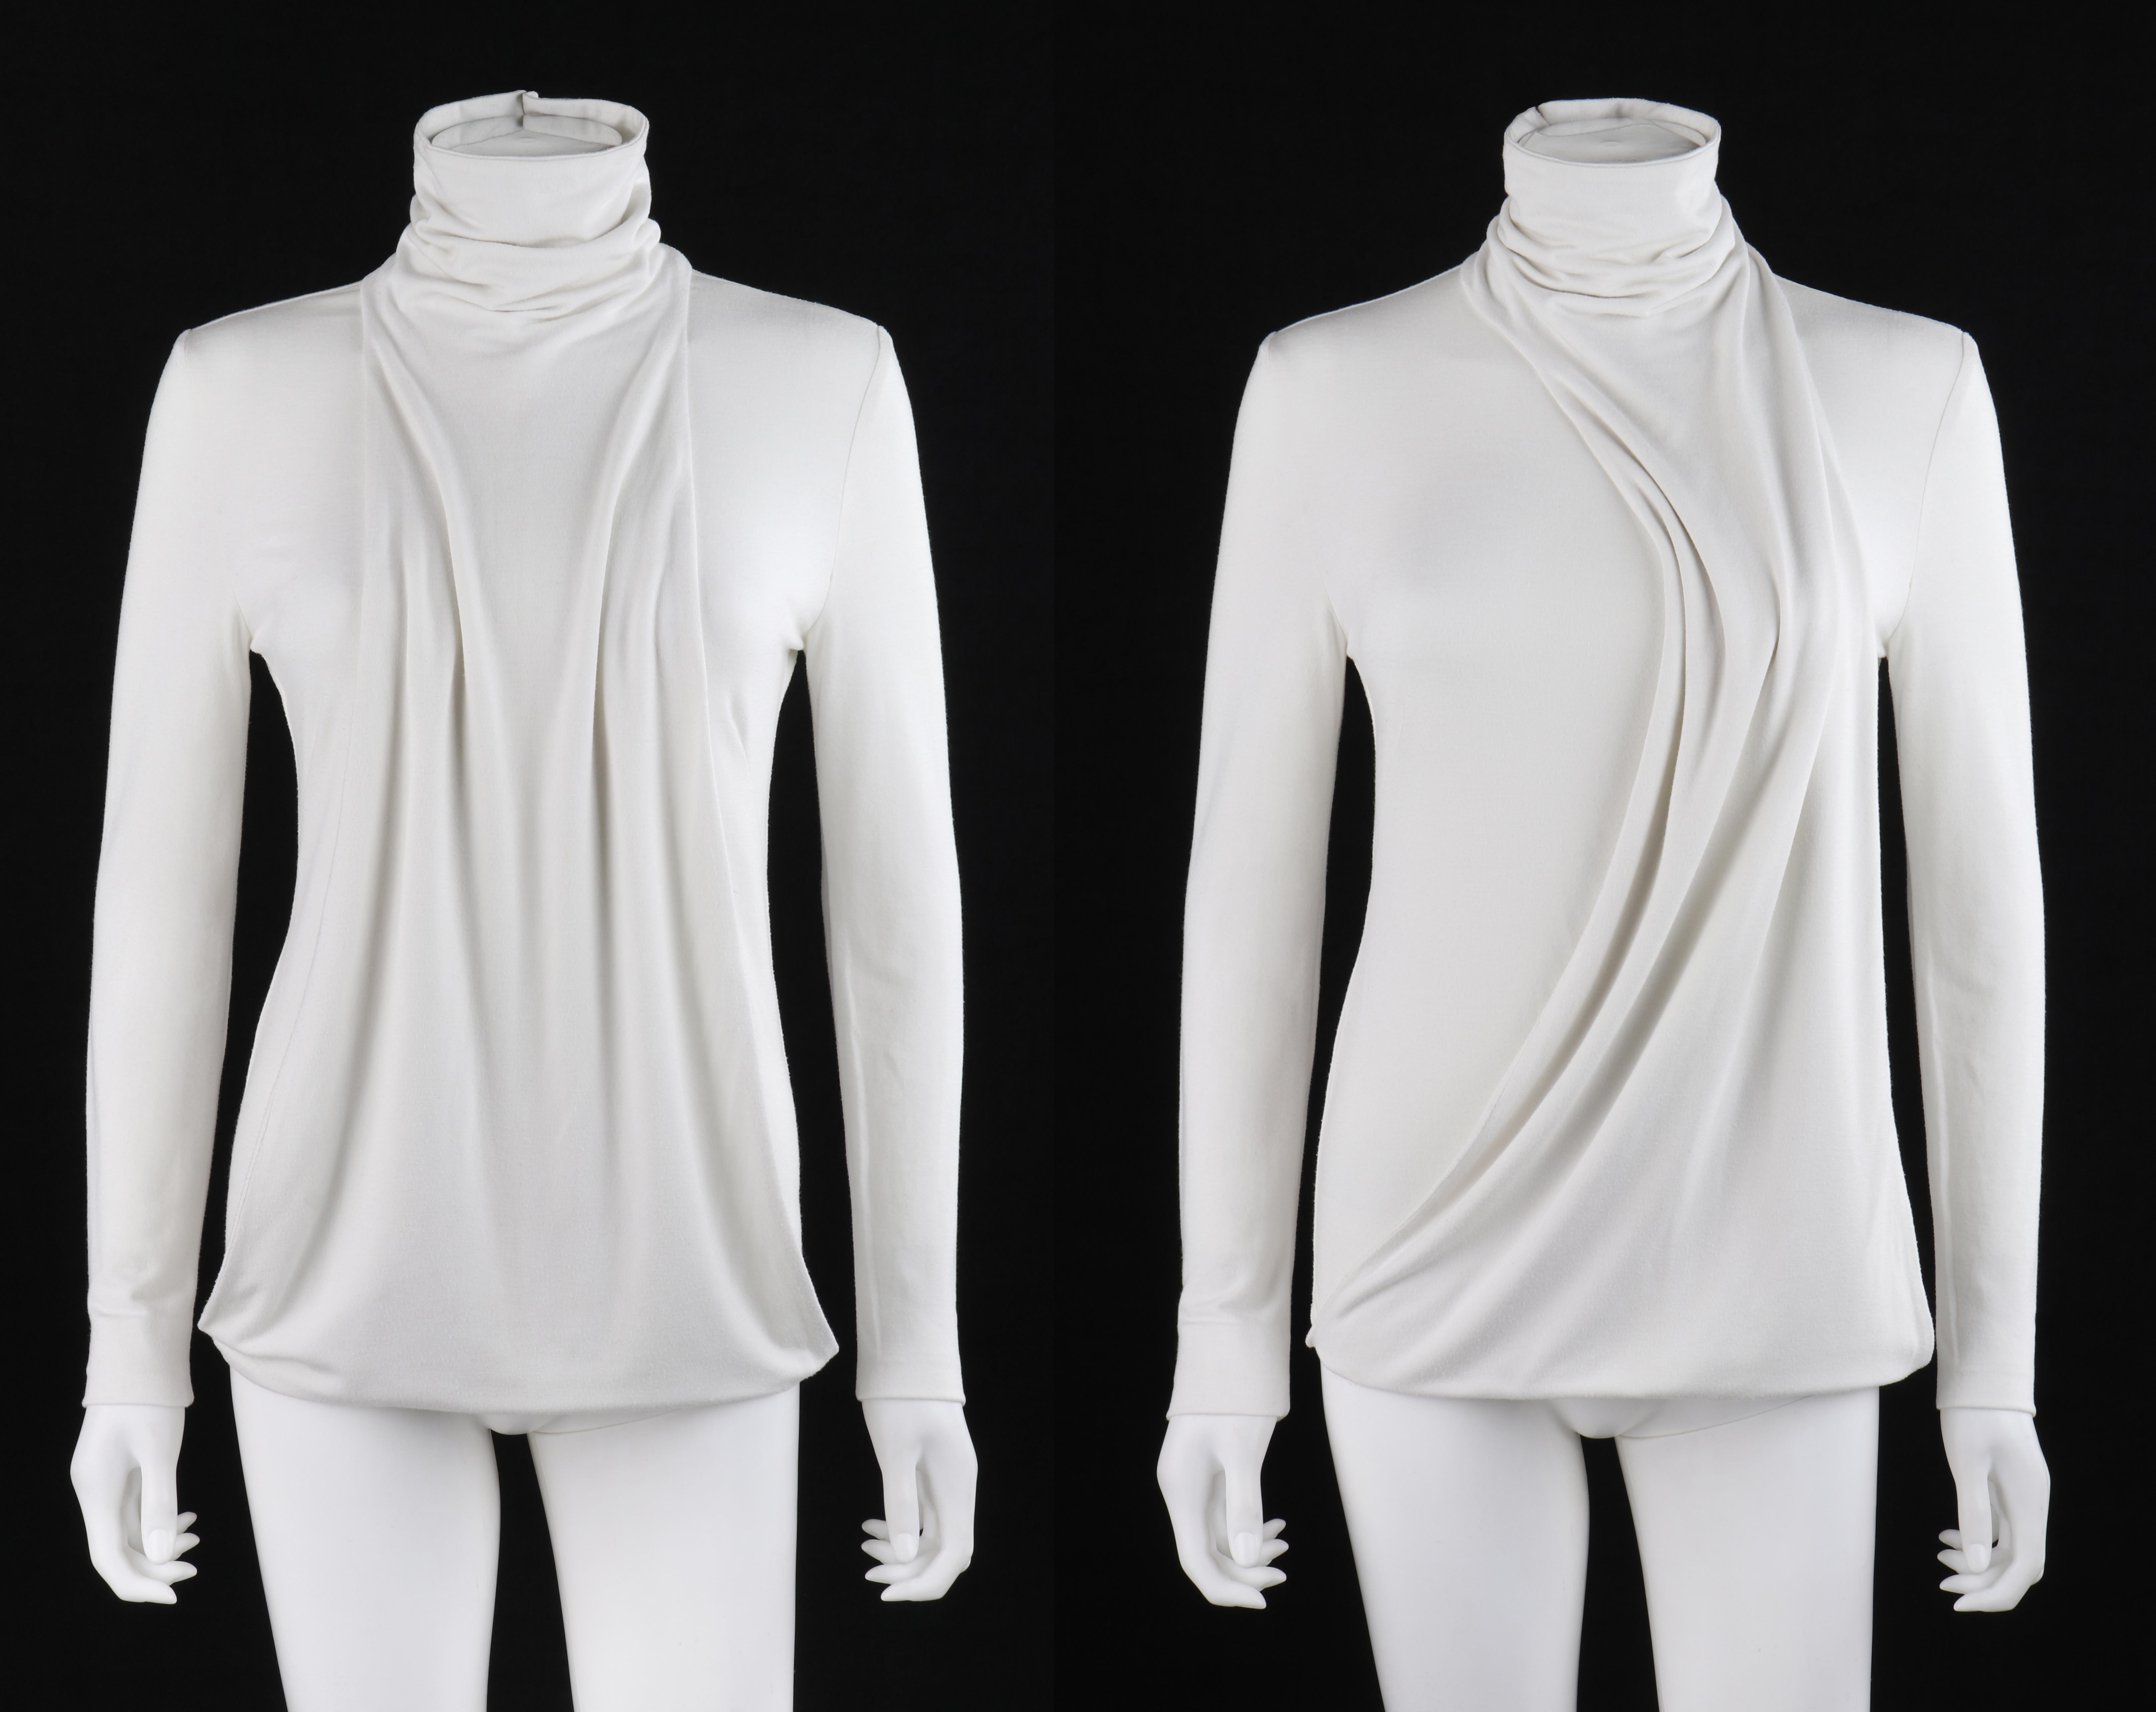 ALEXANDER McQUEEN S/S 2000 “Eye” White Convertible Twisted Front High Neck Top For Sale 2